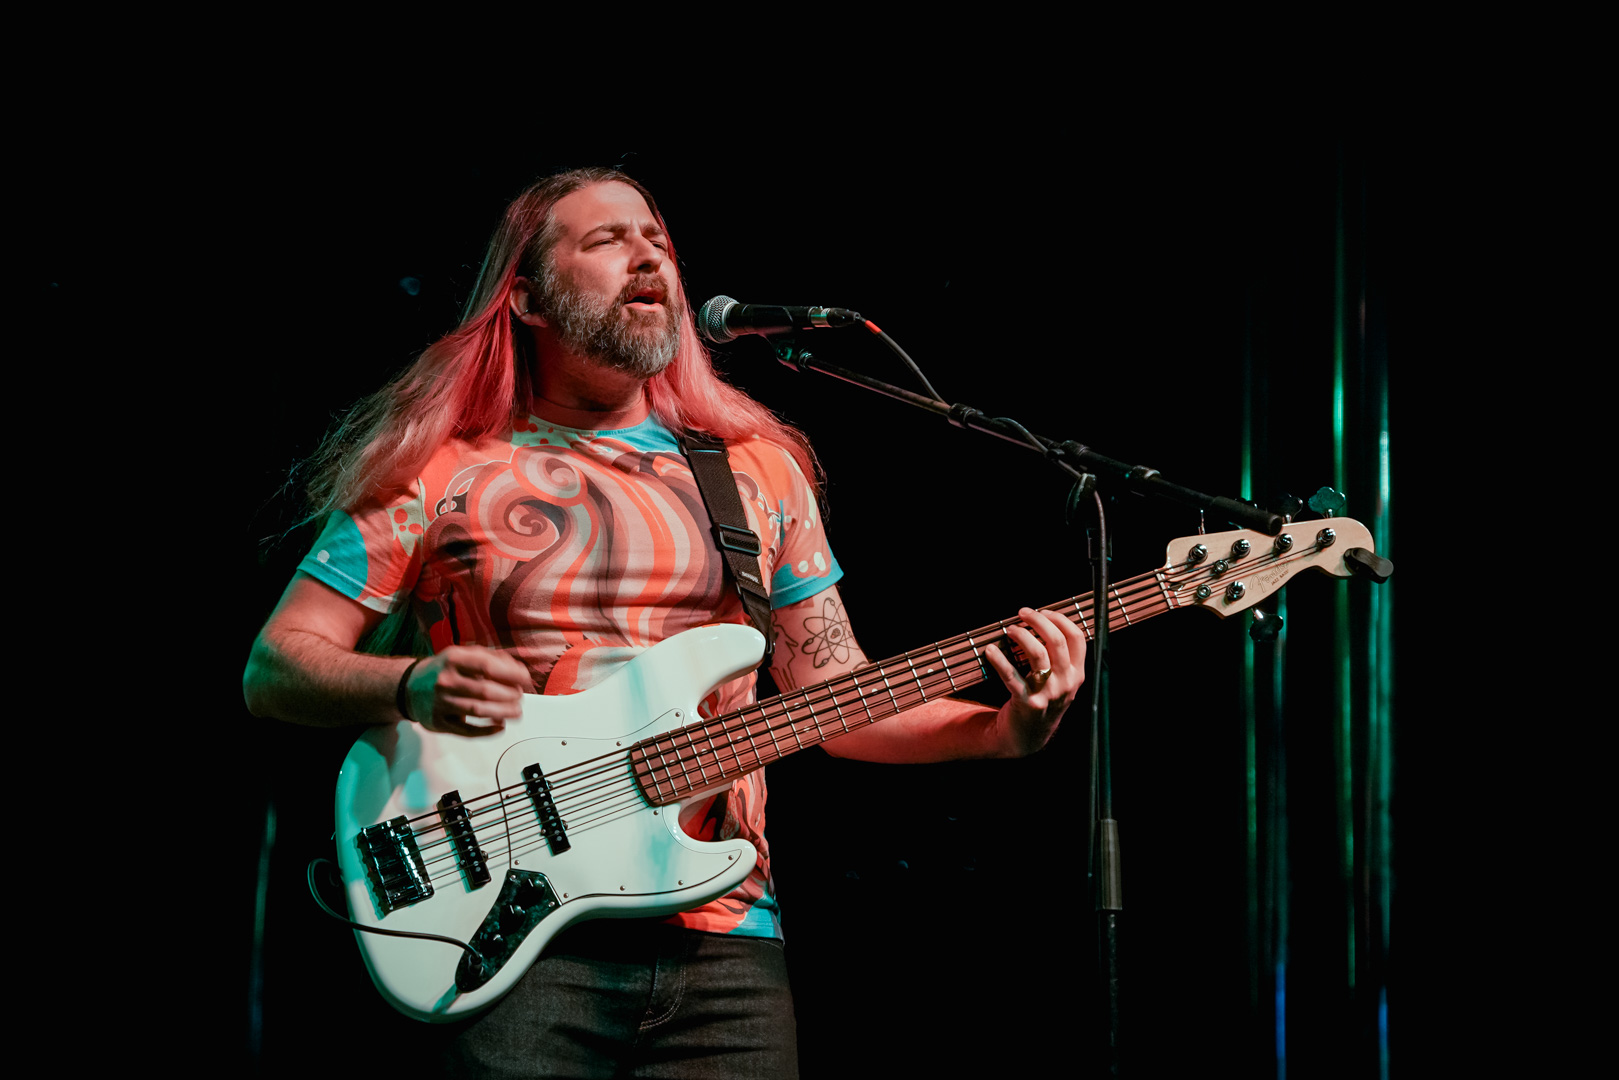 A bass player on stage